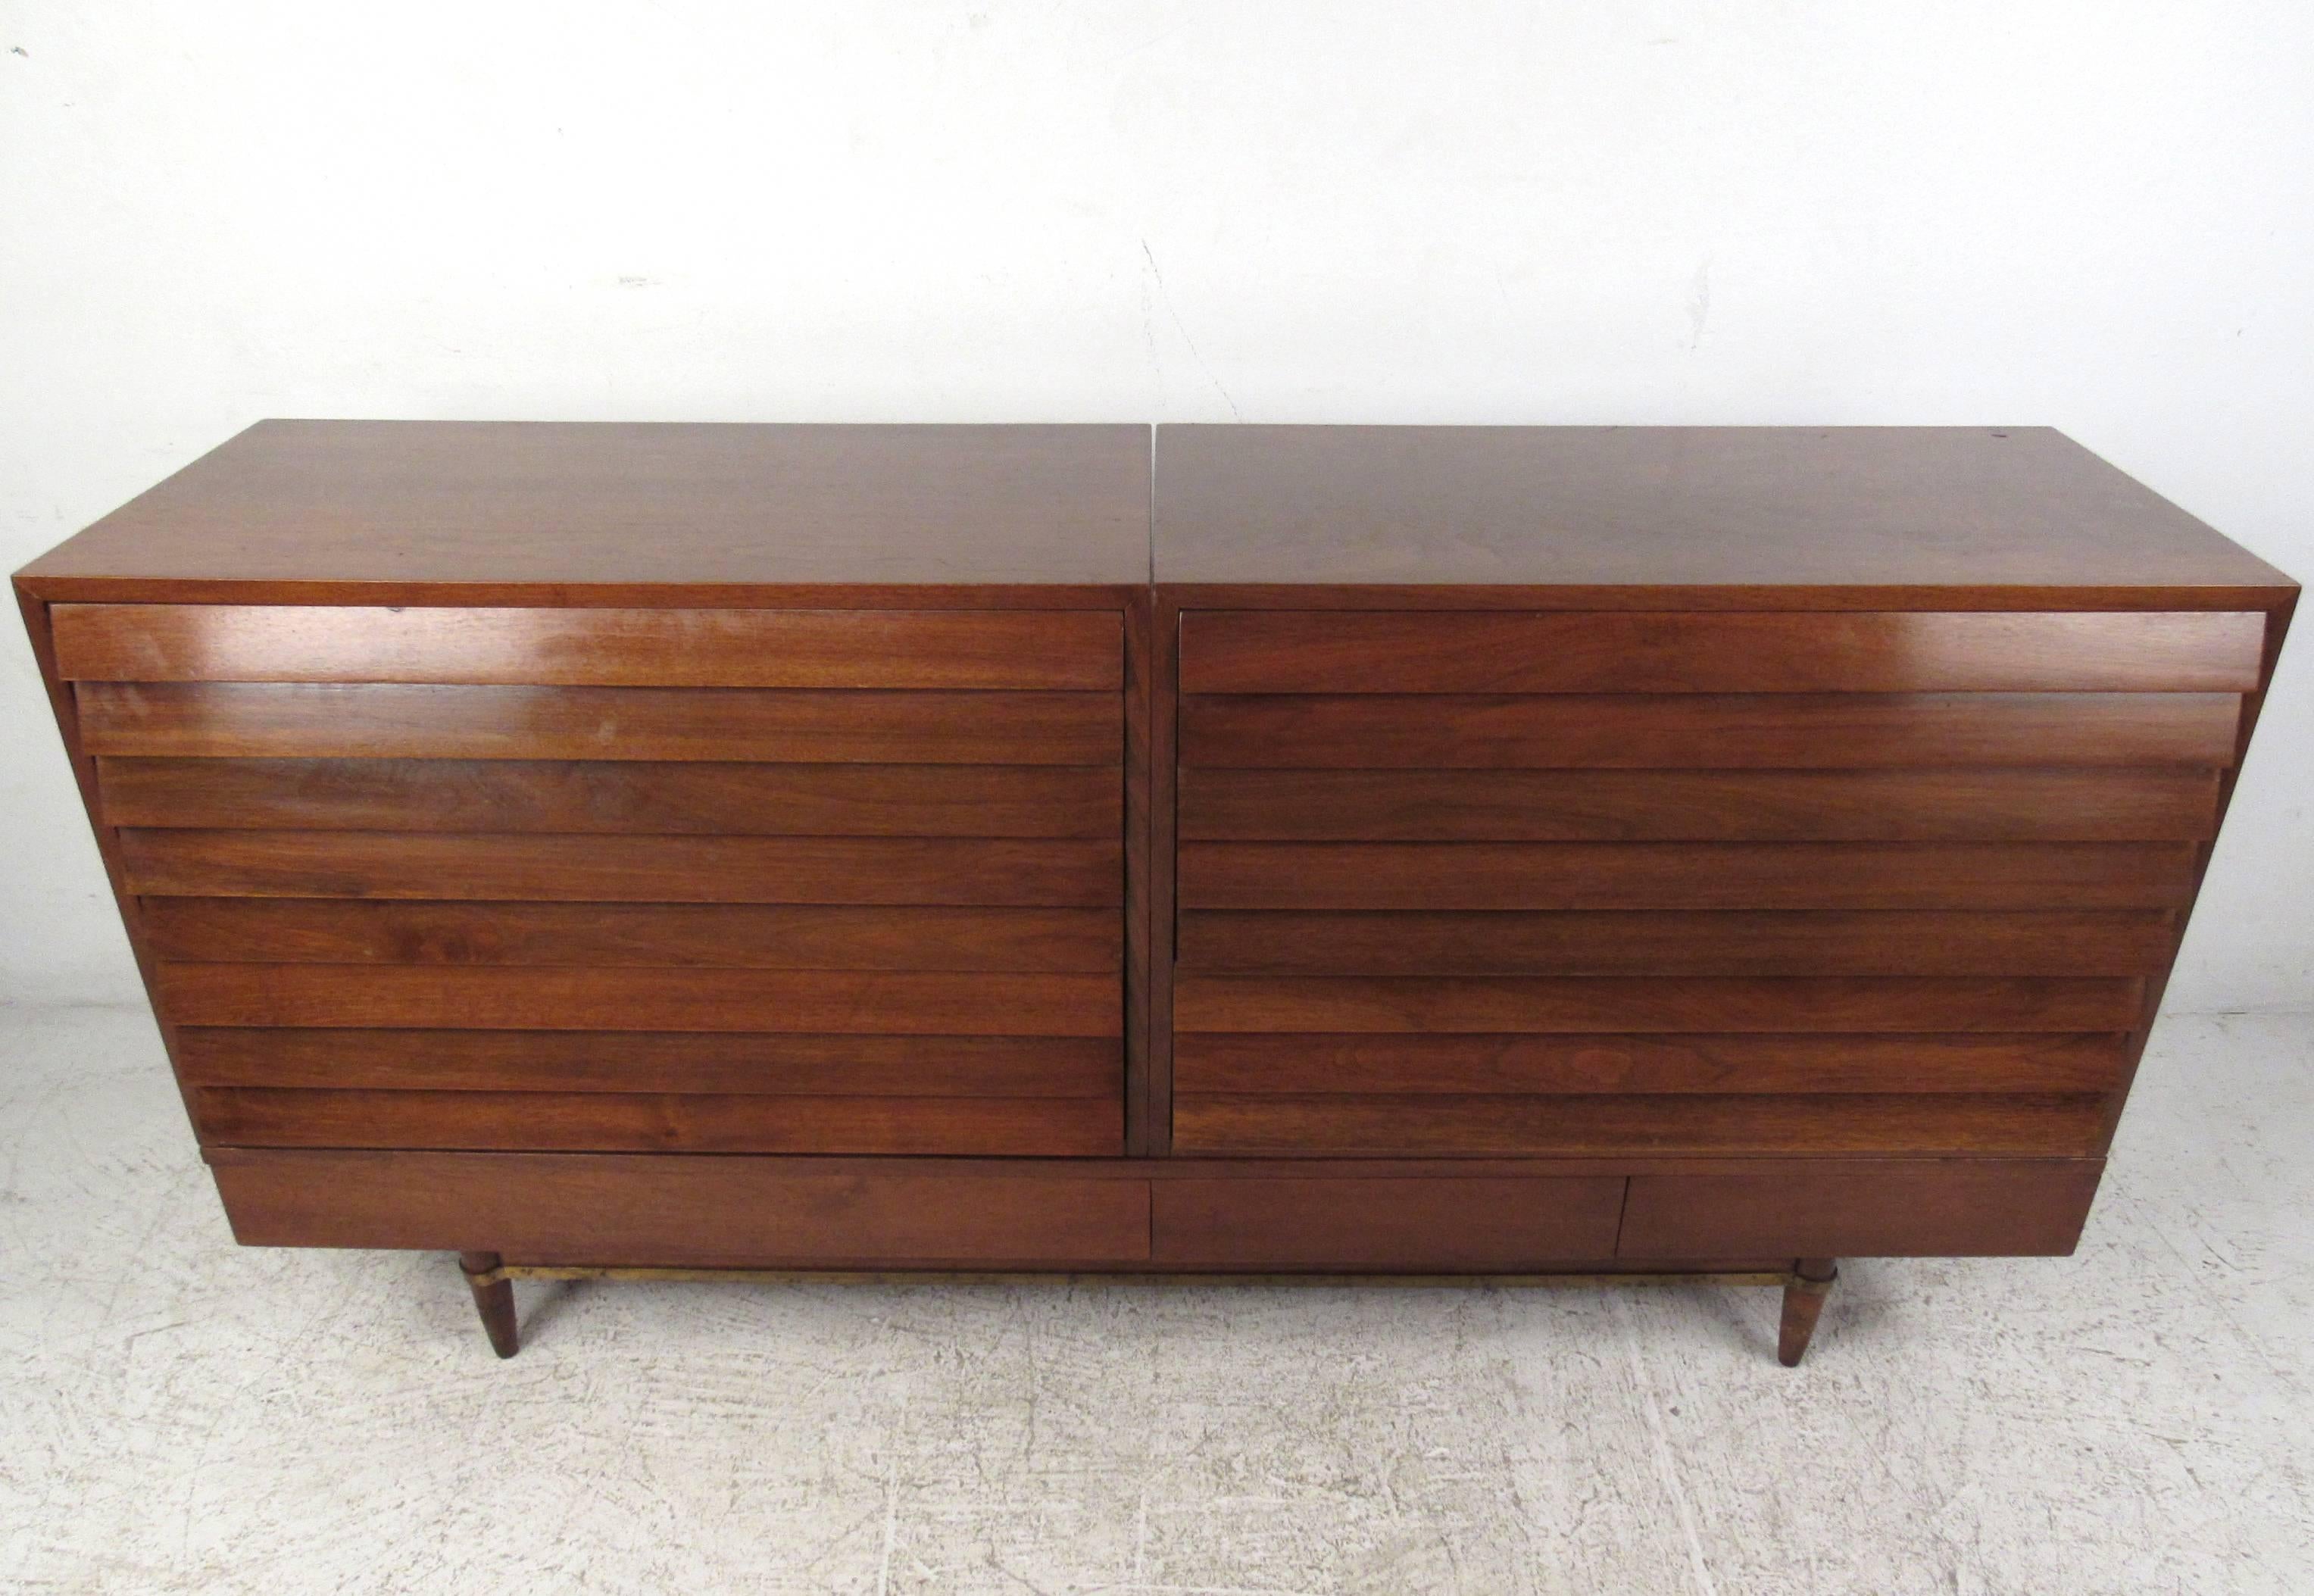 This unique Mid-Century Modern American walnut dresser consists of three separate pieces that configure wonderfully into this nine drawer piece. Two-three drawer louvered cabinets rest on top of the low coffee table style three drawer base. Rich